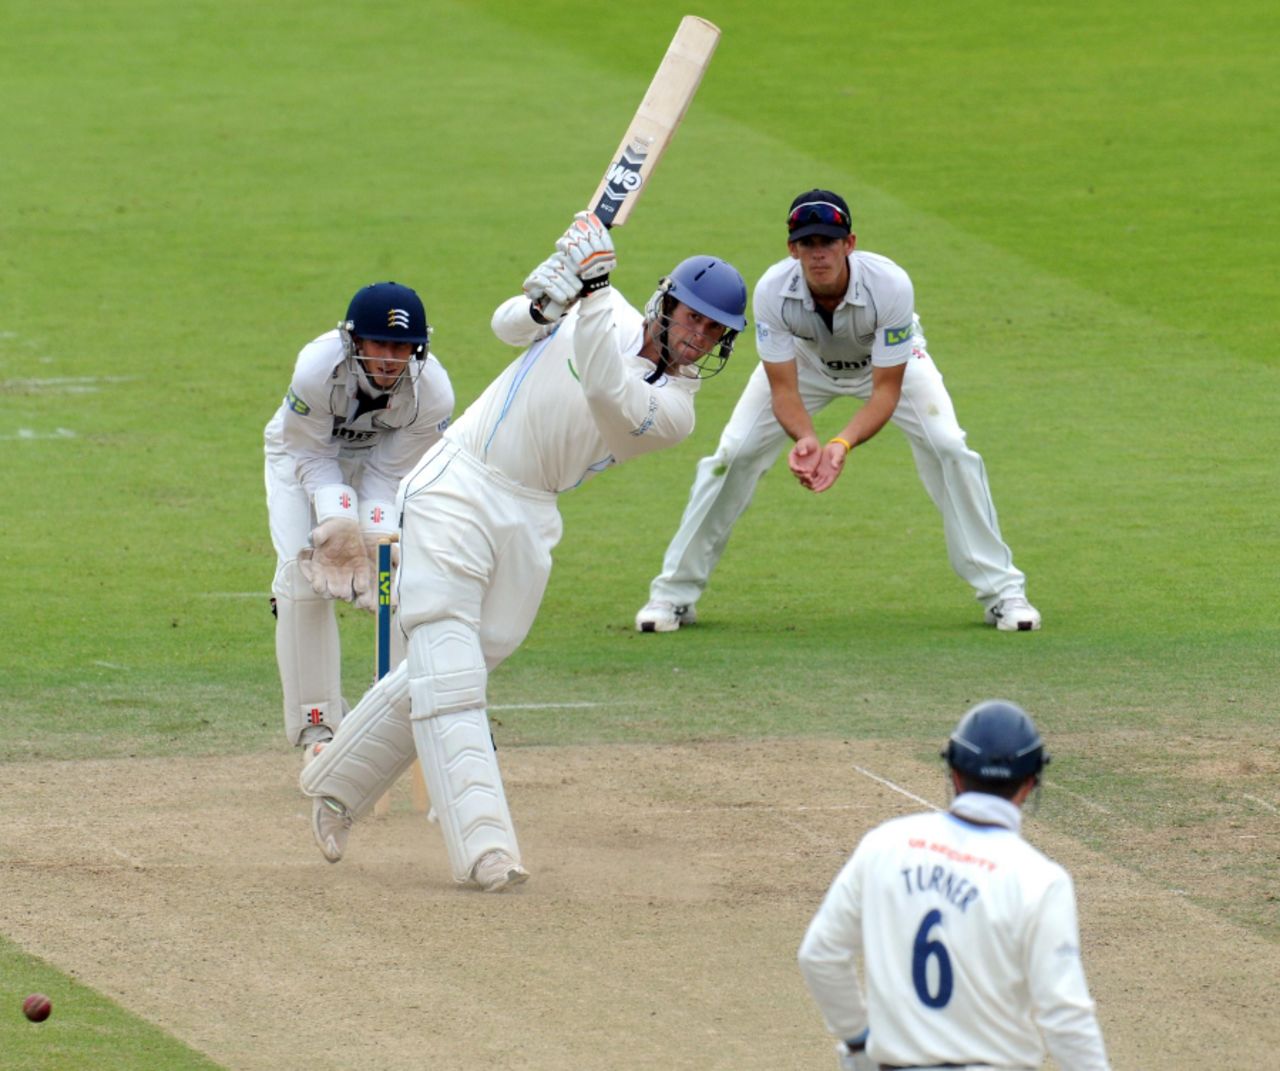 Ross Whiteley clips to leg during his fifty, Middlesex v Derbyshire, County Championship Division Two, Lord's, July 29 2011